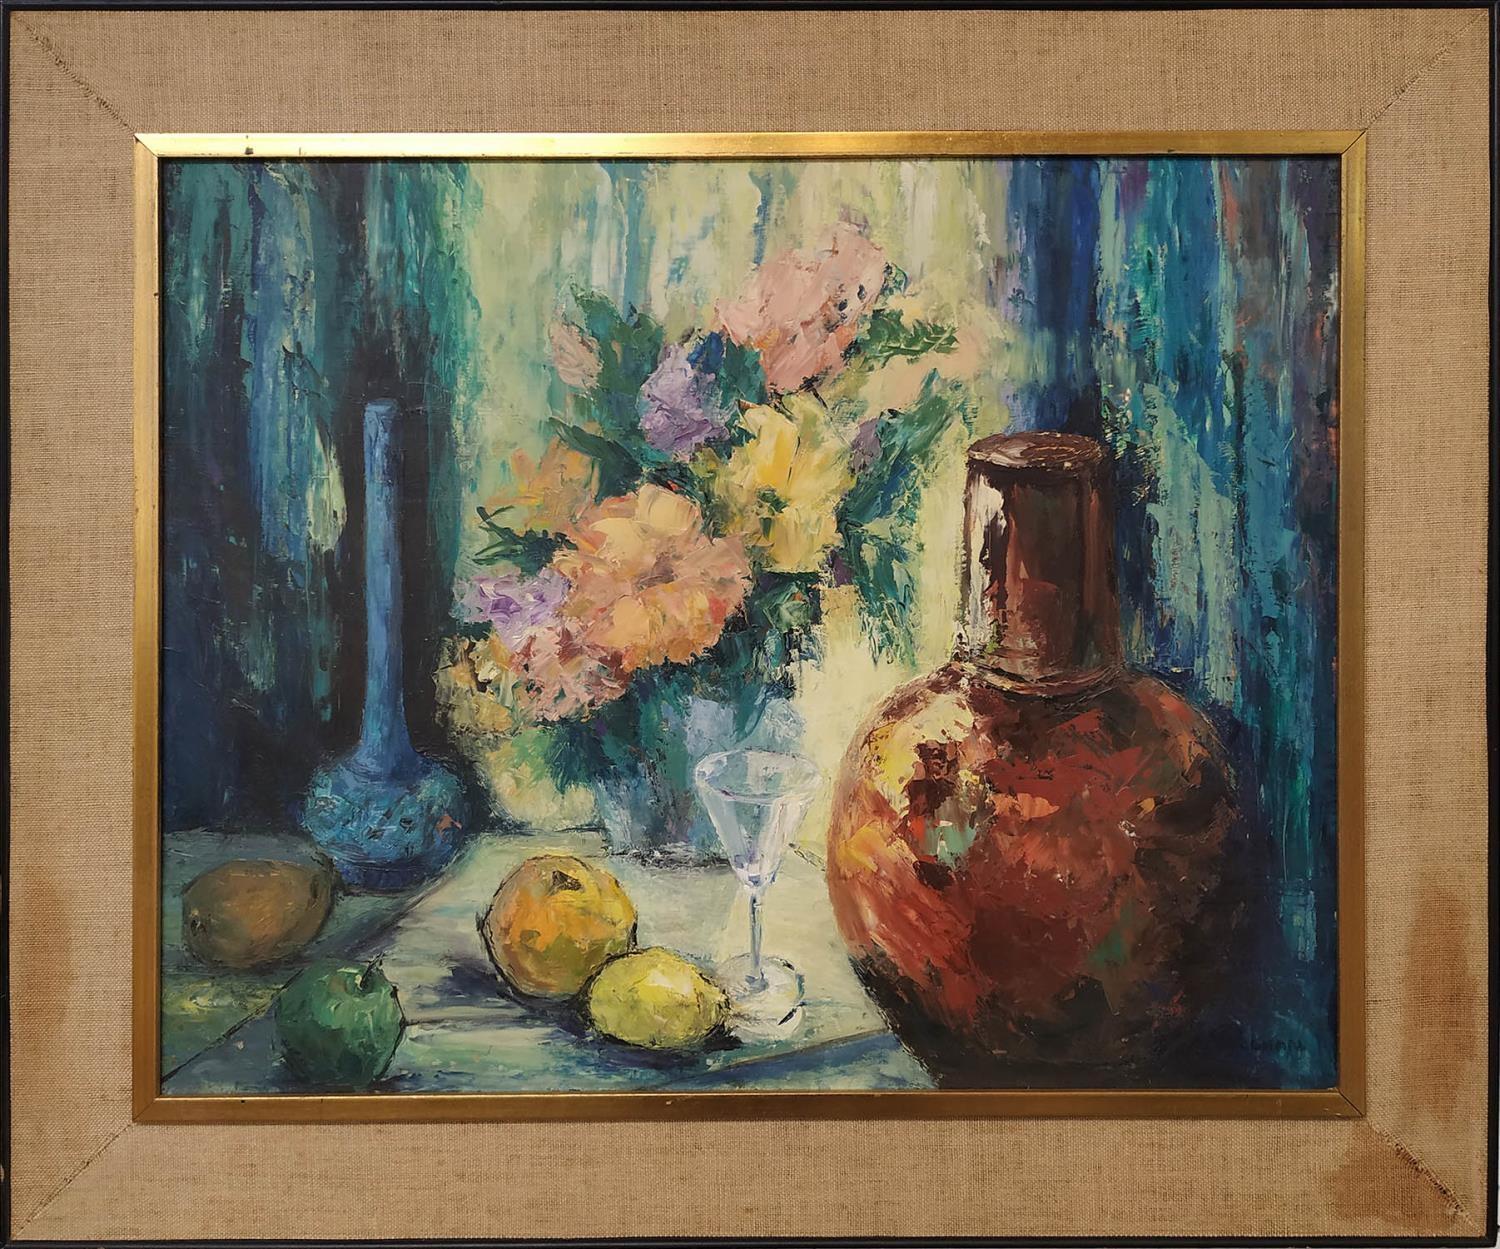 VAUGHAN (20th century) 'Still Life with Lemons and Jug', oil on board, signed and framed, 59cm x